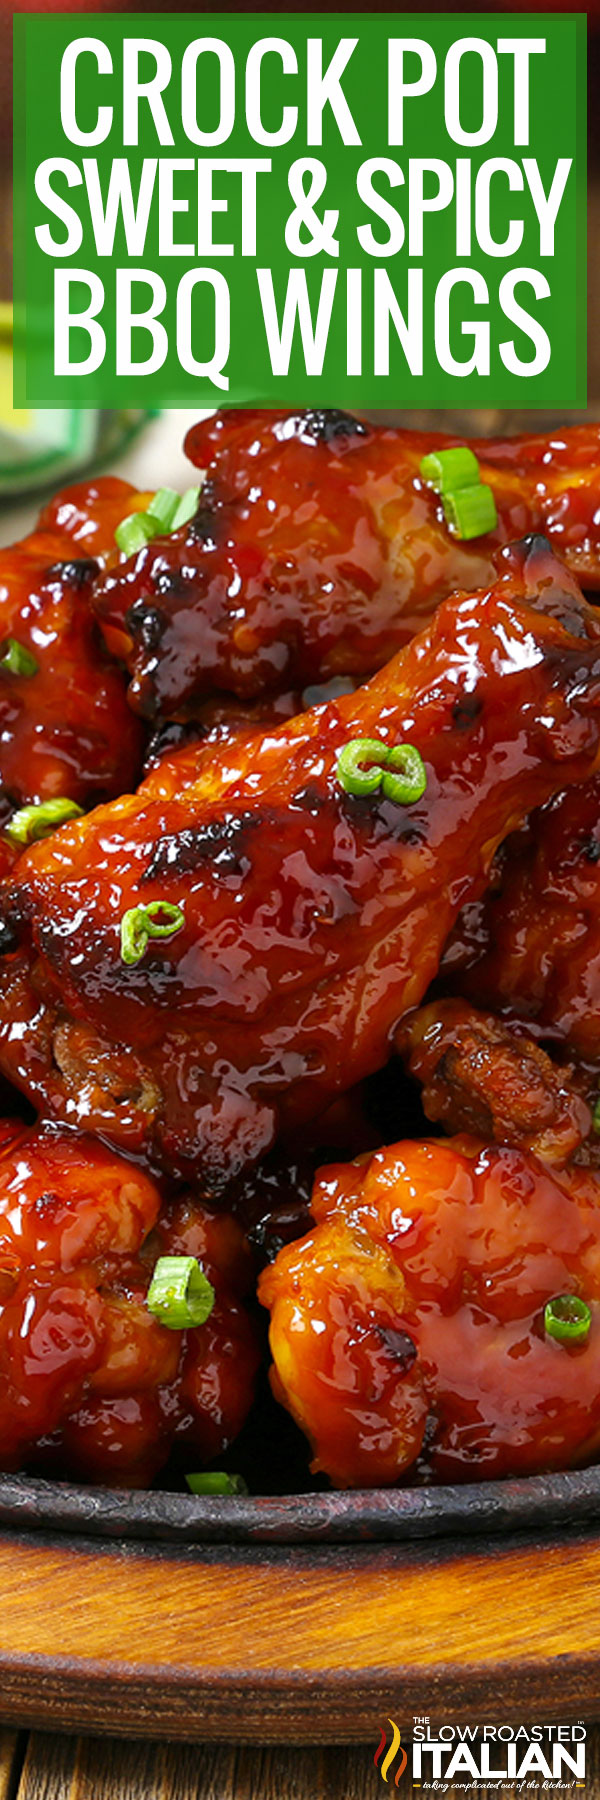 titled image (and shown): crock pot sweet & spicy BBQ wings